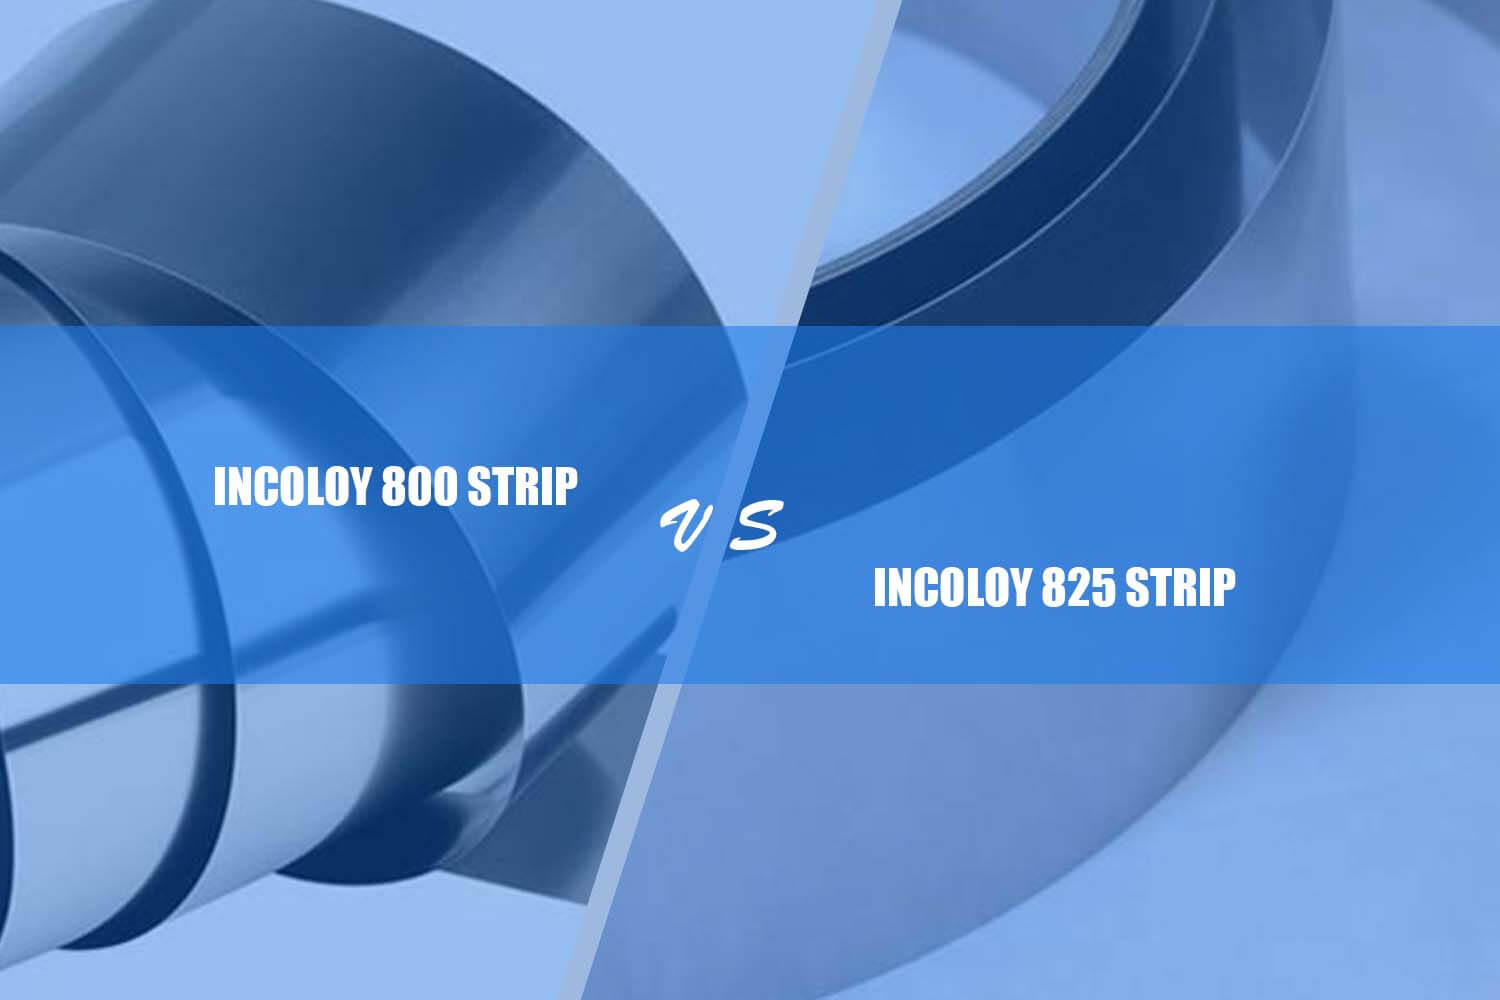 difference between incoloy 800 strip and incoloy 825 strook